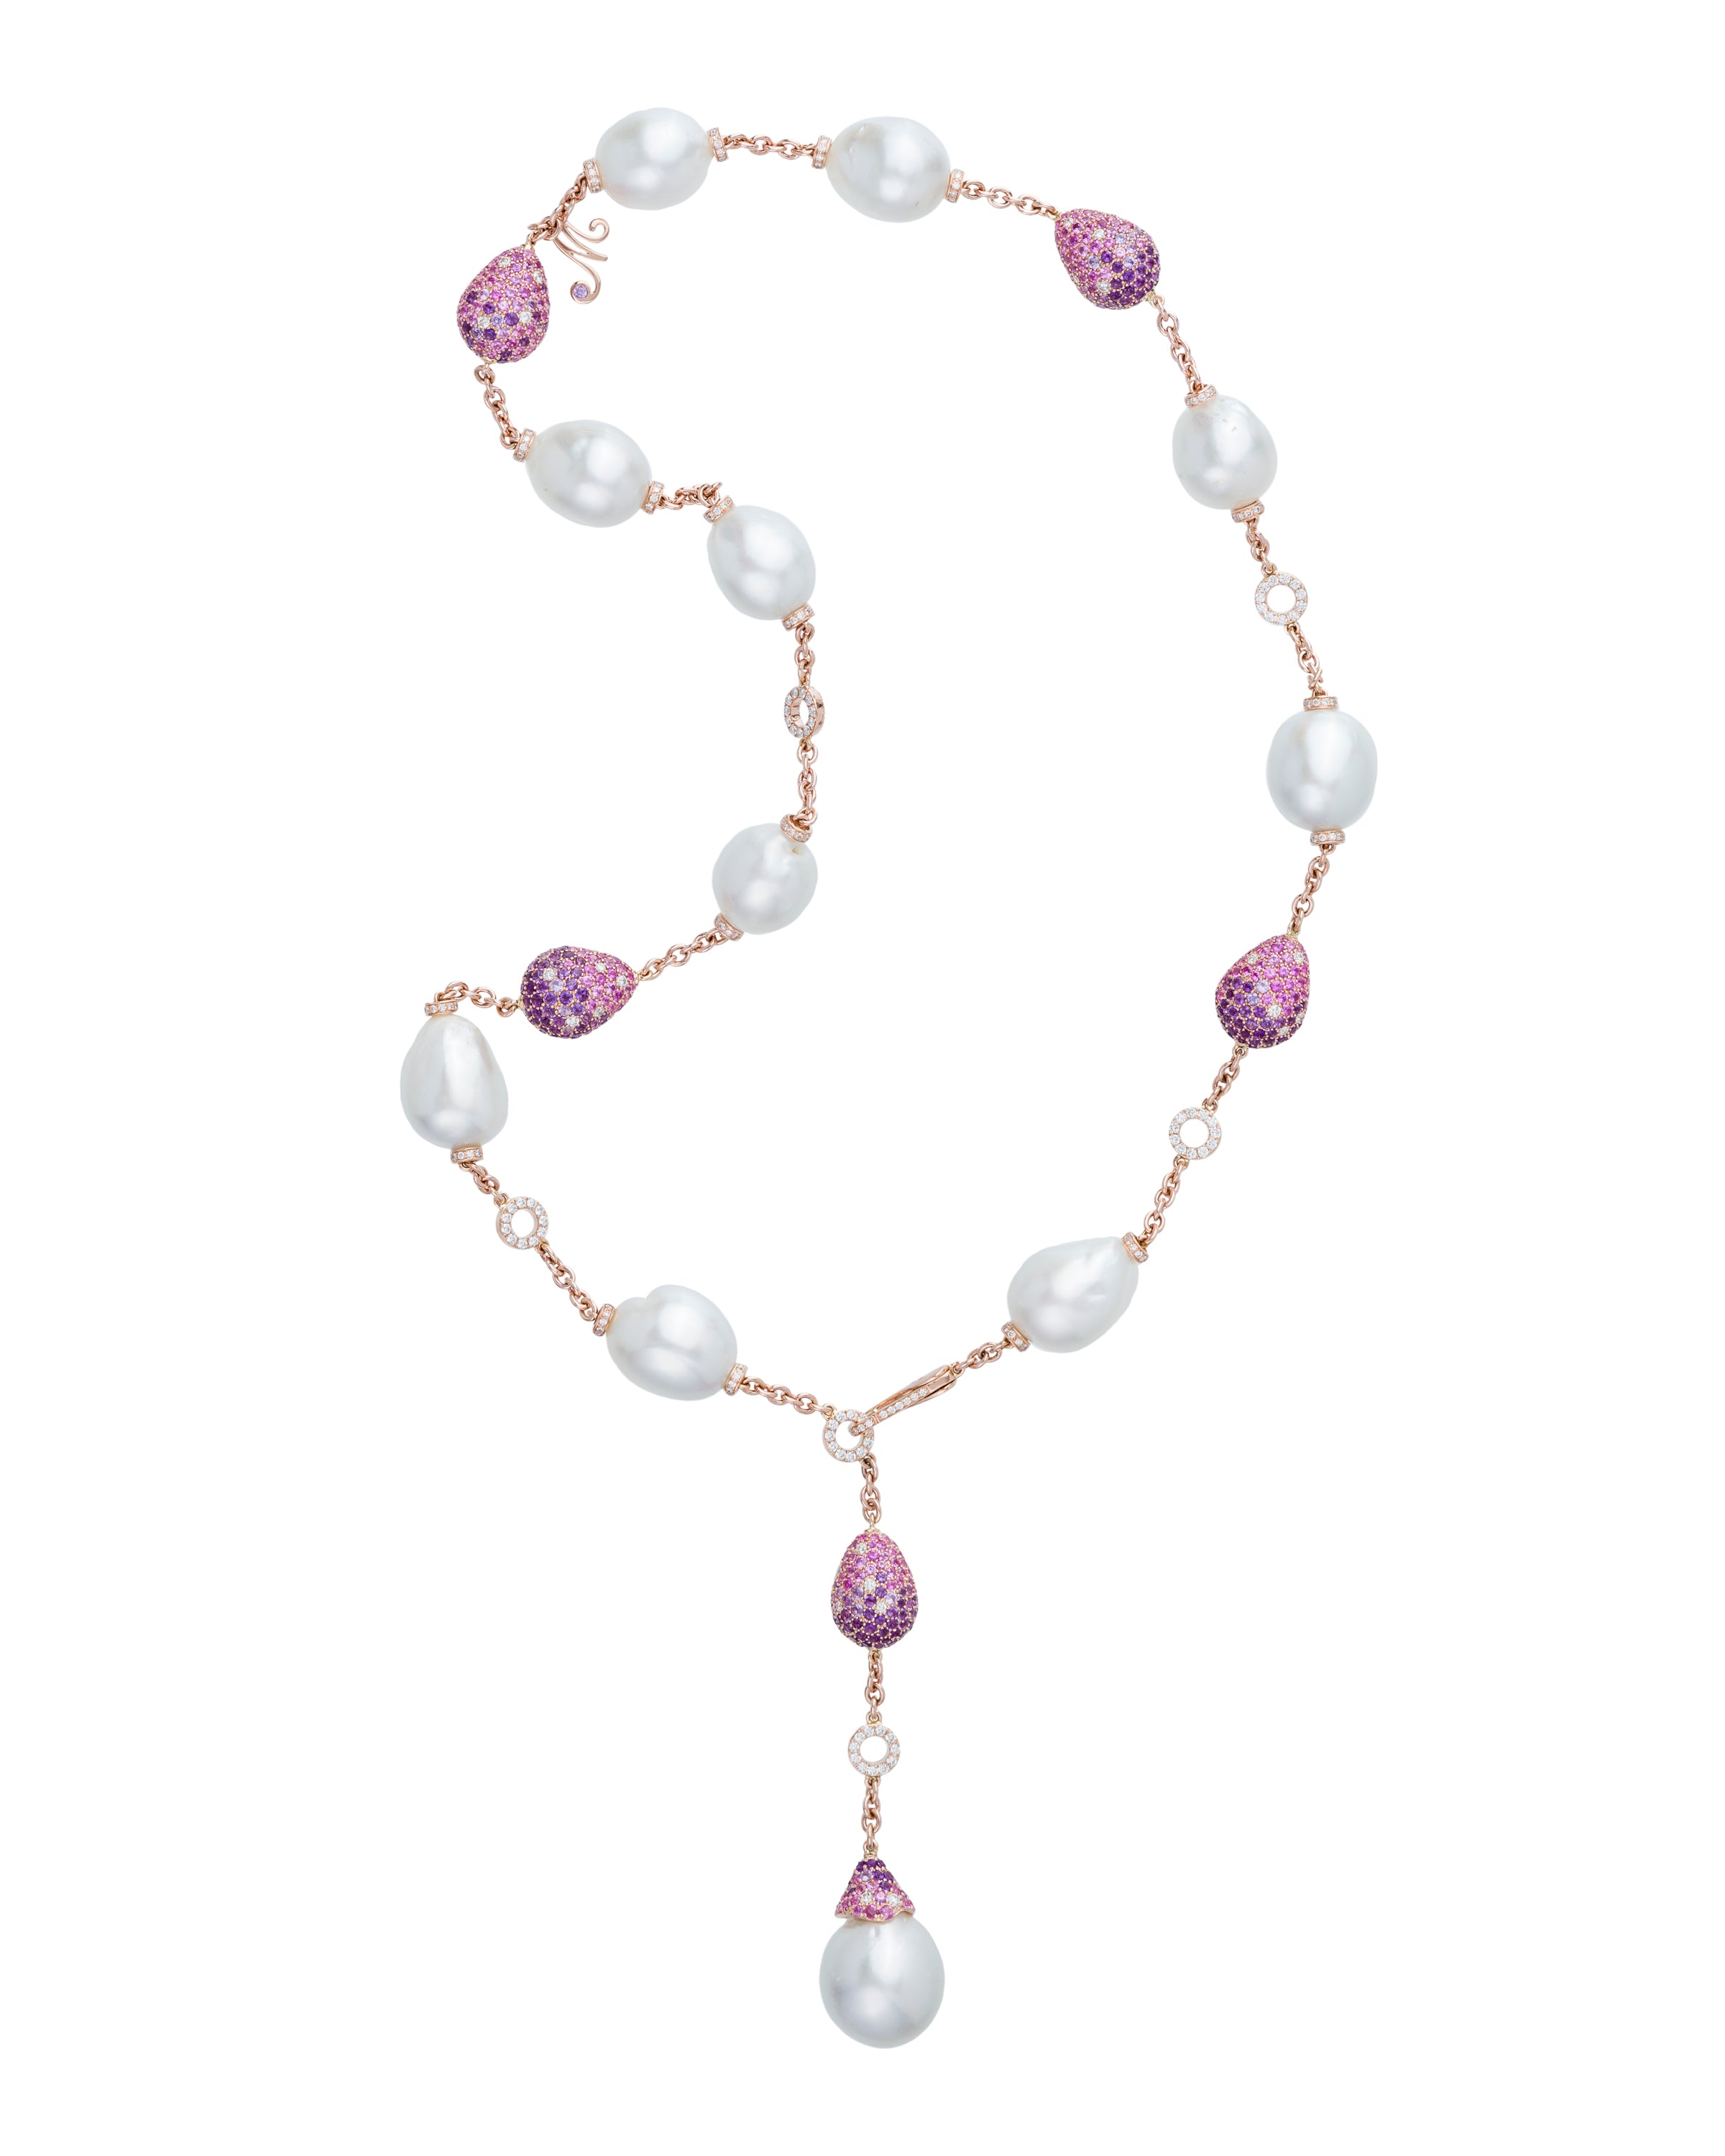 "Bliss" lariat necklace with  Australian South Sea pearls enhanced with ‘pebbles’ of purple and pink sapphires, amethyst and diamonds, crafted in 18 karat rose gold.